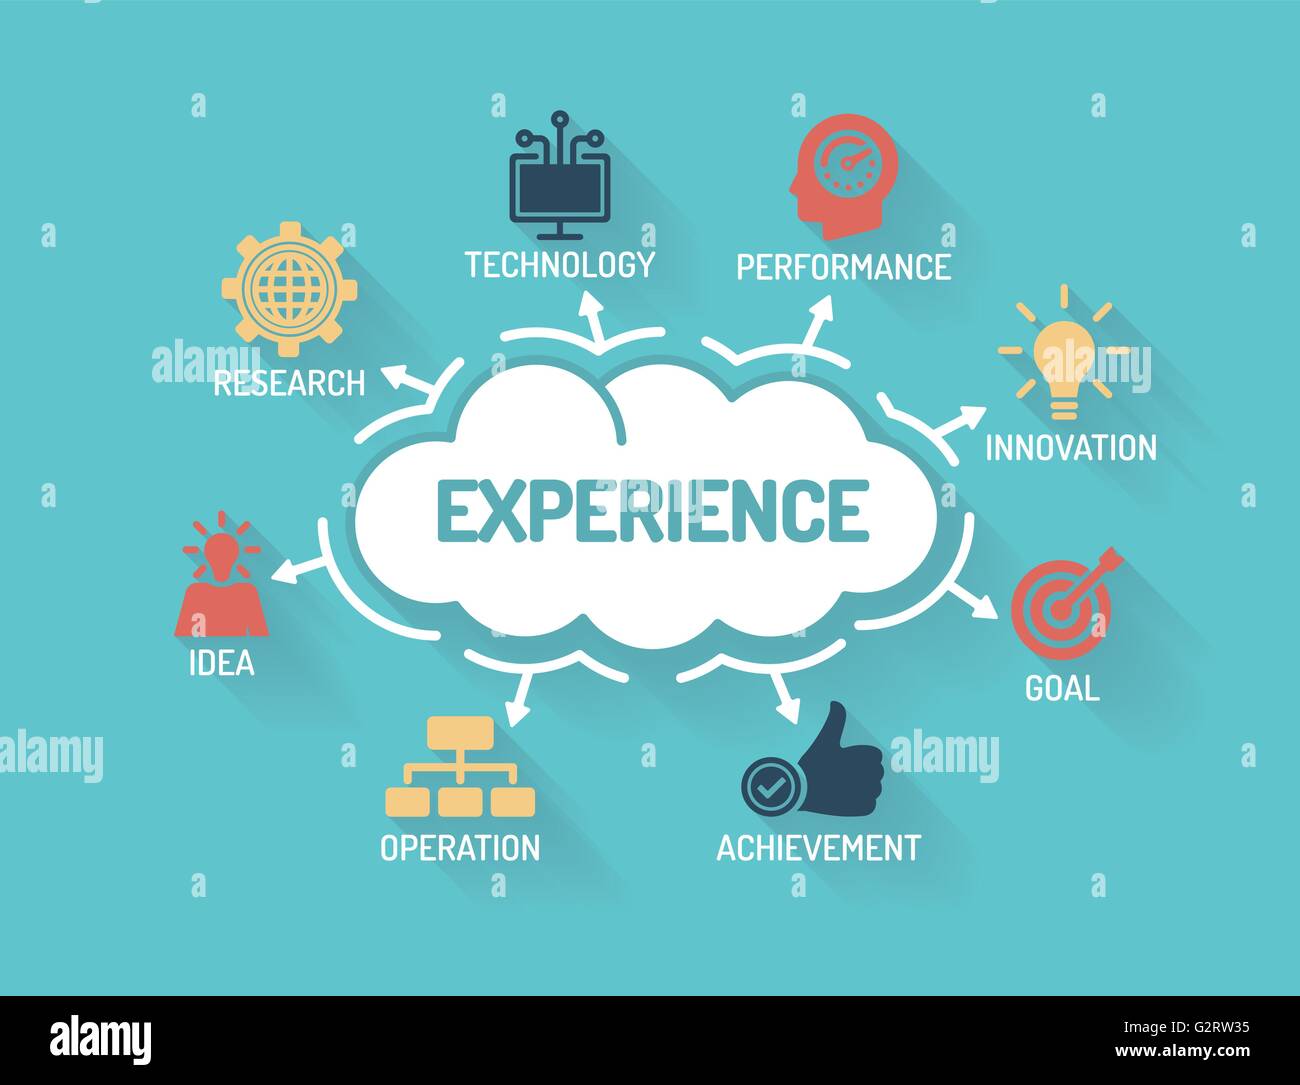 Experience - Chart with keywords and icons - Flat Design Stock Vector